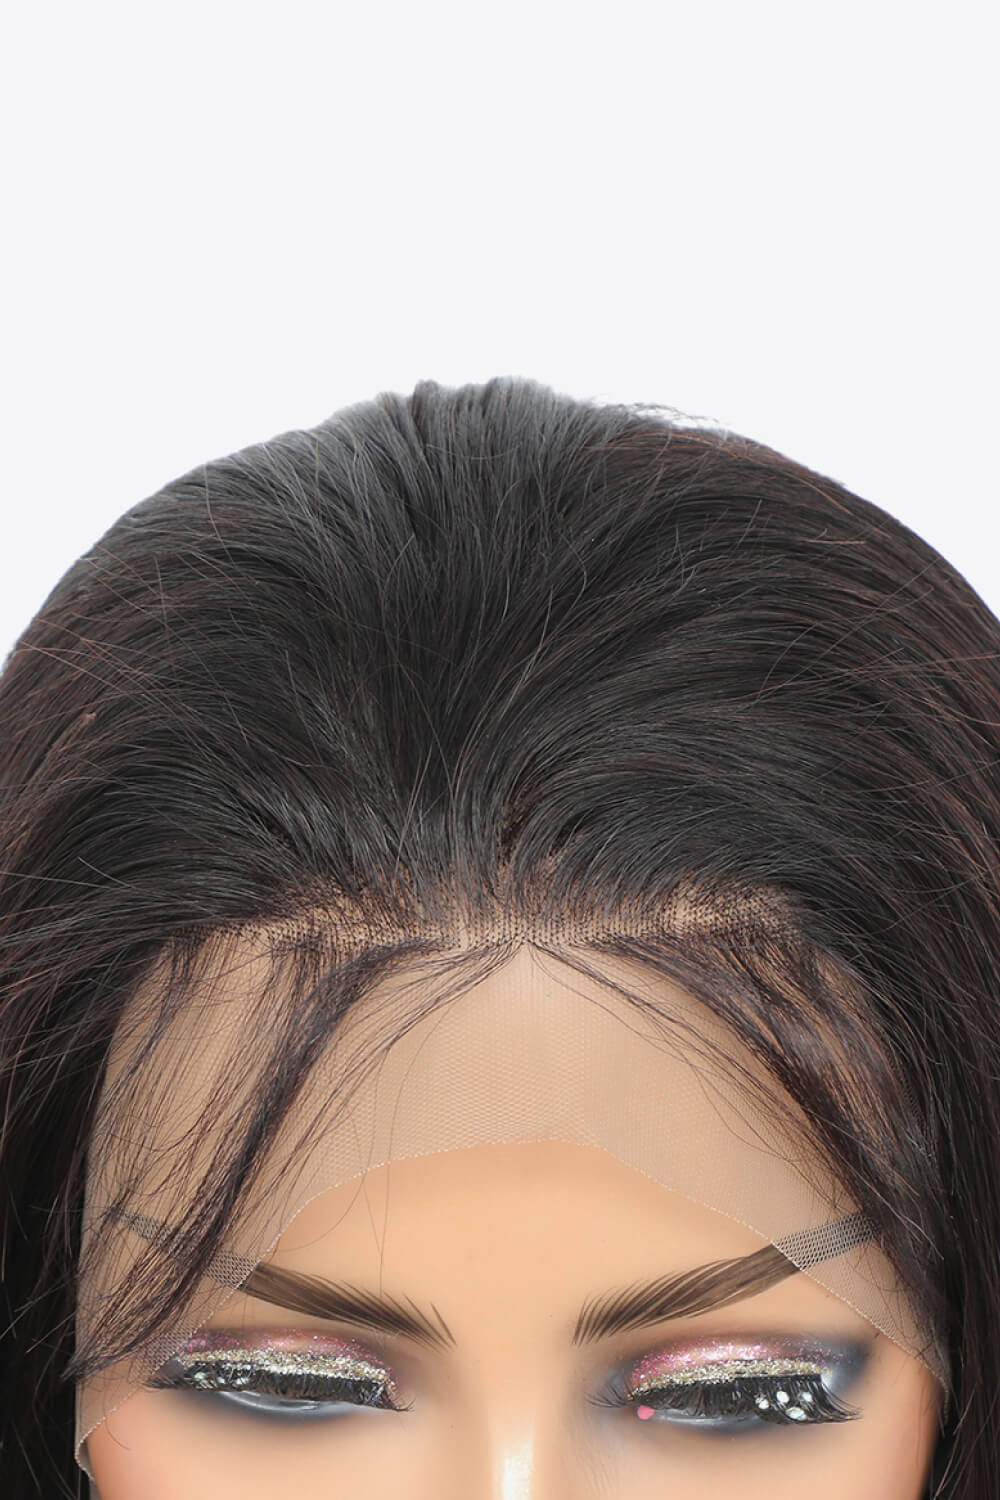 18" 13*4" Lace Front Wigs Human Virgin Hair in Natural Color 150% Density